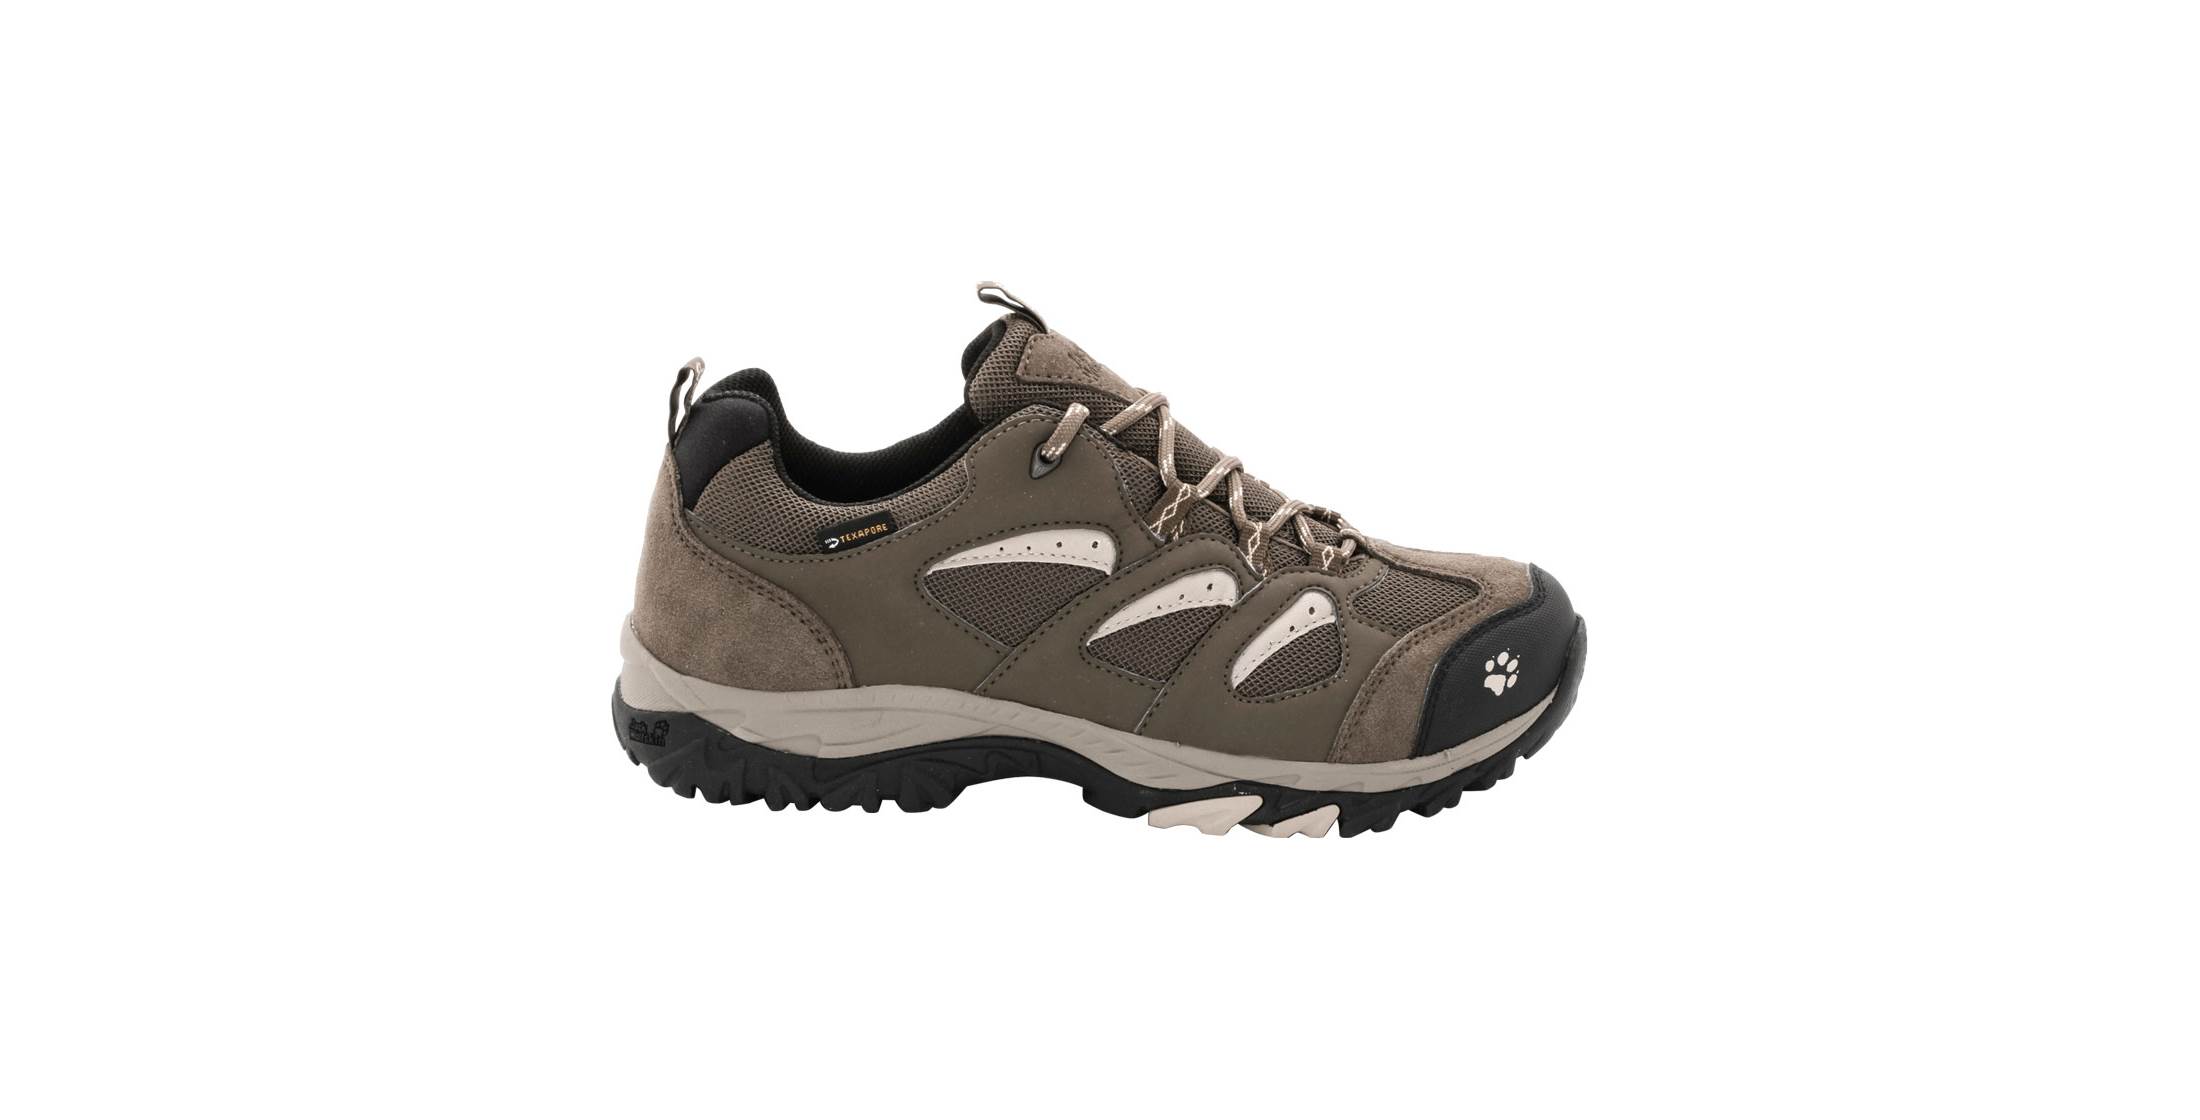 Jack Wolfskin Womens Mtn Storm Low Texapore Waterproof Shoes OutdoorGB